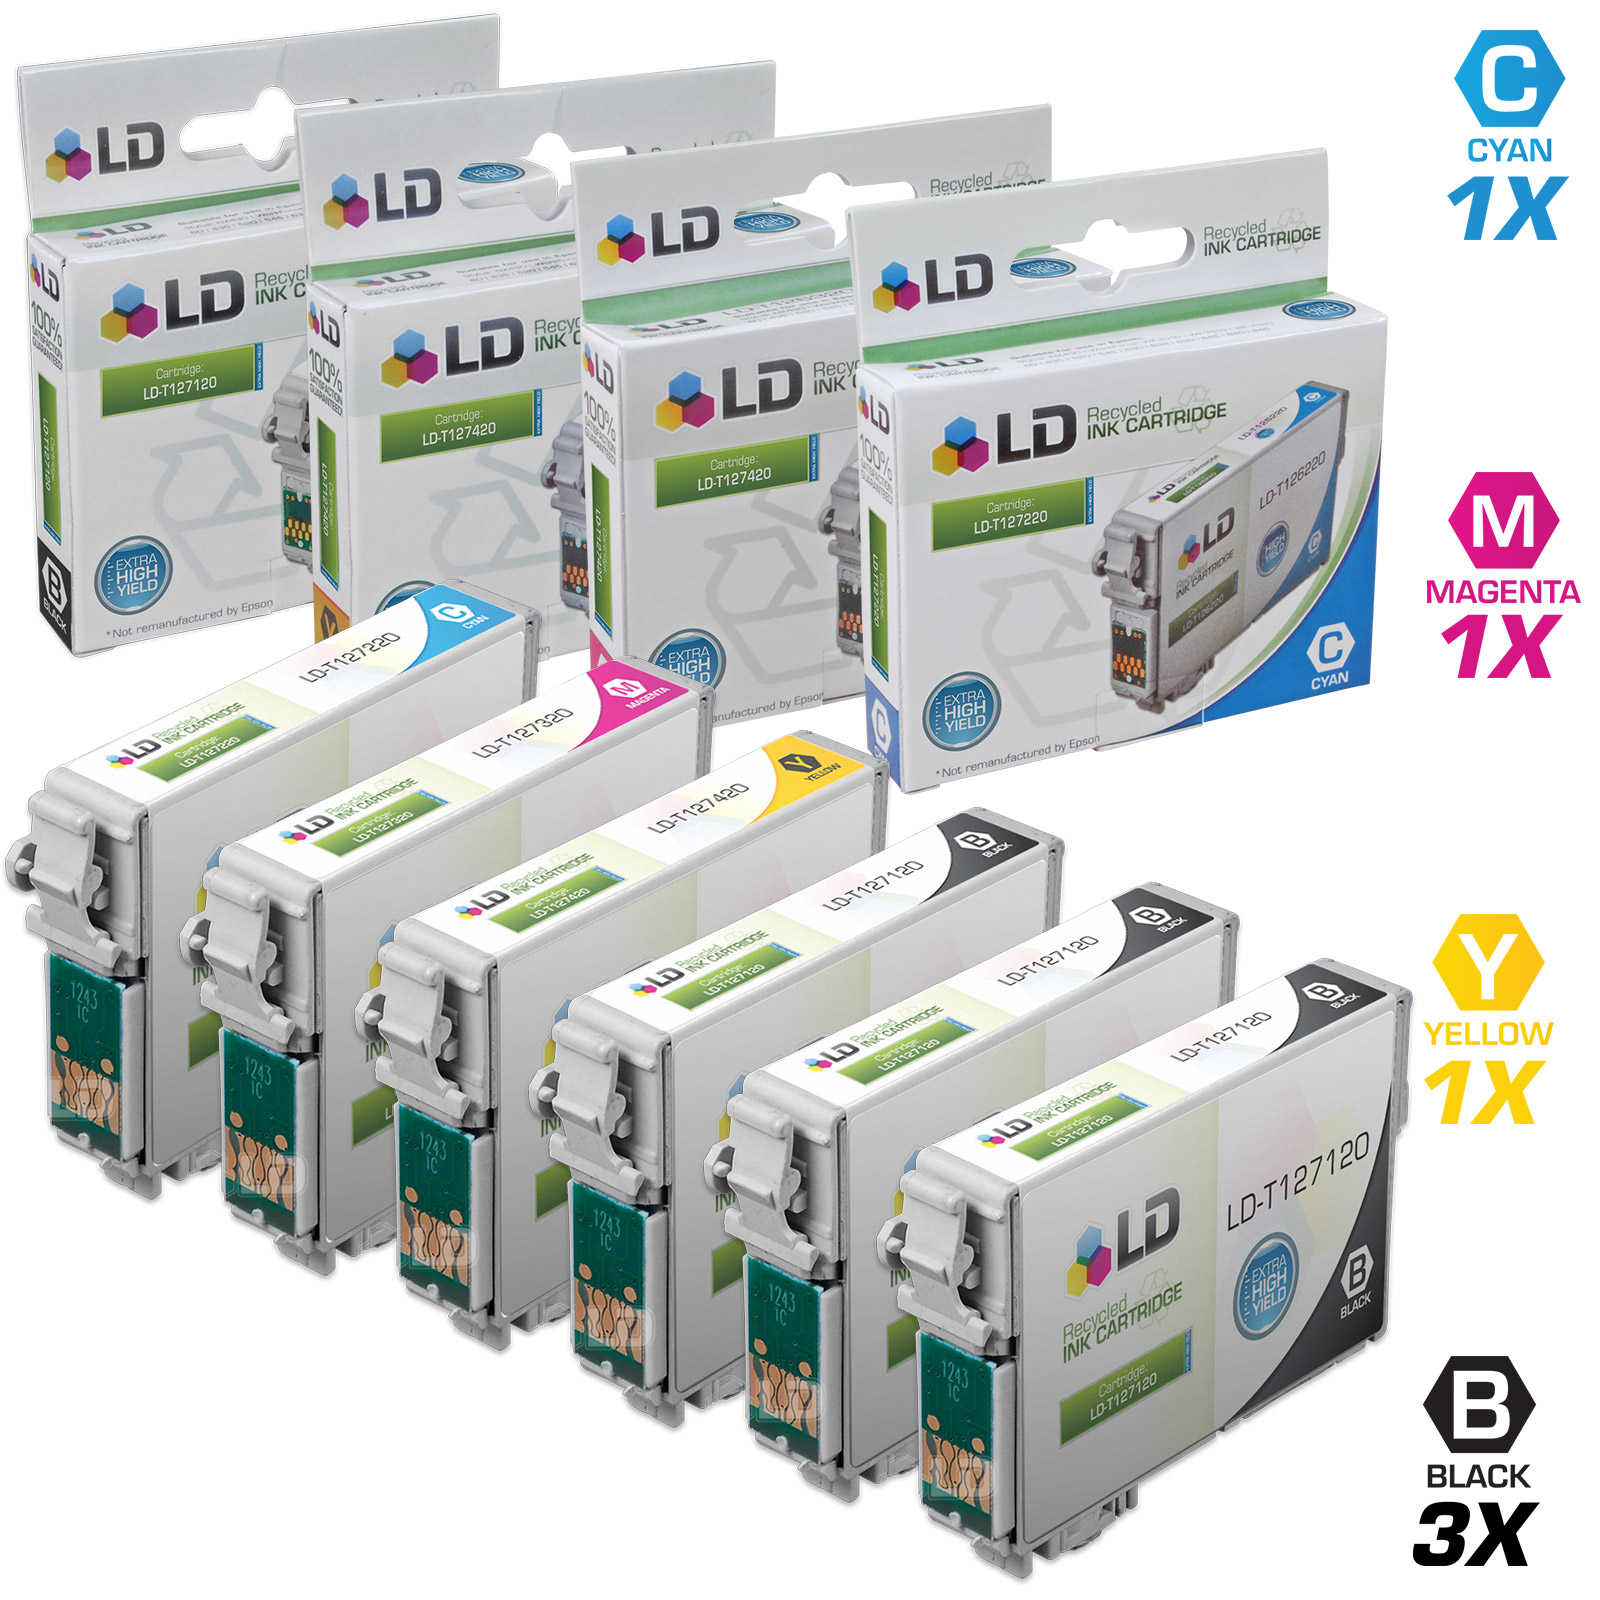 LD Epson Remanufactured T127 Set of 6 Extra High Capacity Cartridges: Includes 3 Black (T127120), 1 Cyan (T127220), 1 Magenta (T127320),1 Yellow (T127420) - image 1 of 1